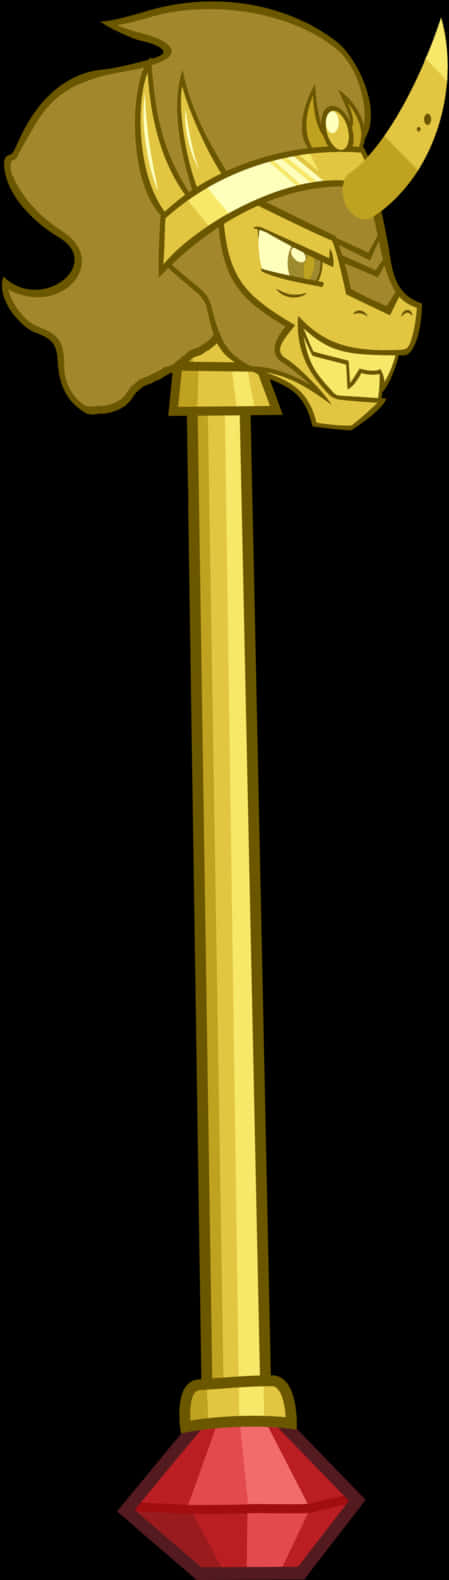 King Clipart Scepter - Scepter King Transparent Background, Hd Png Download